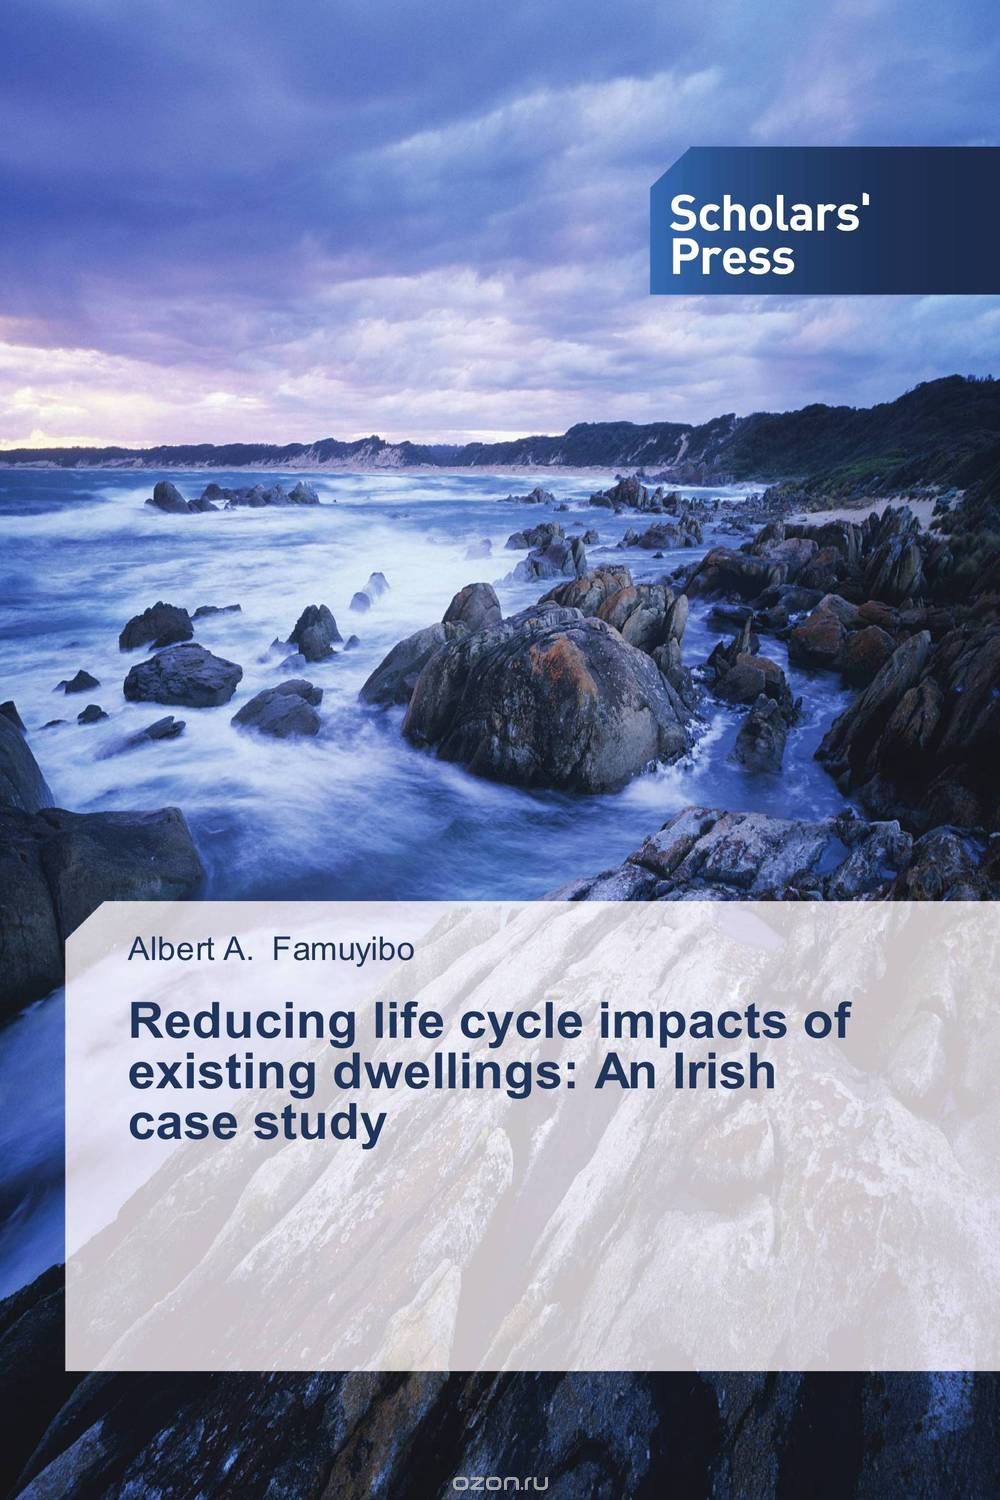 Reducing life cycle impacts of existing dwellings: An Irish case study